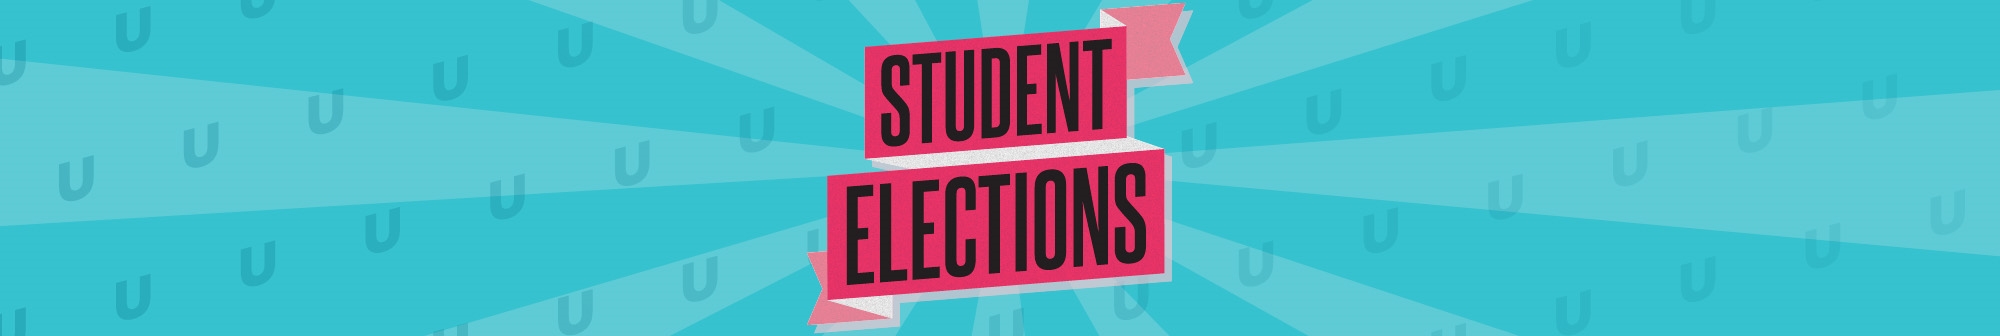 Student Elections Global Vote